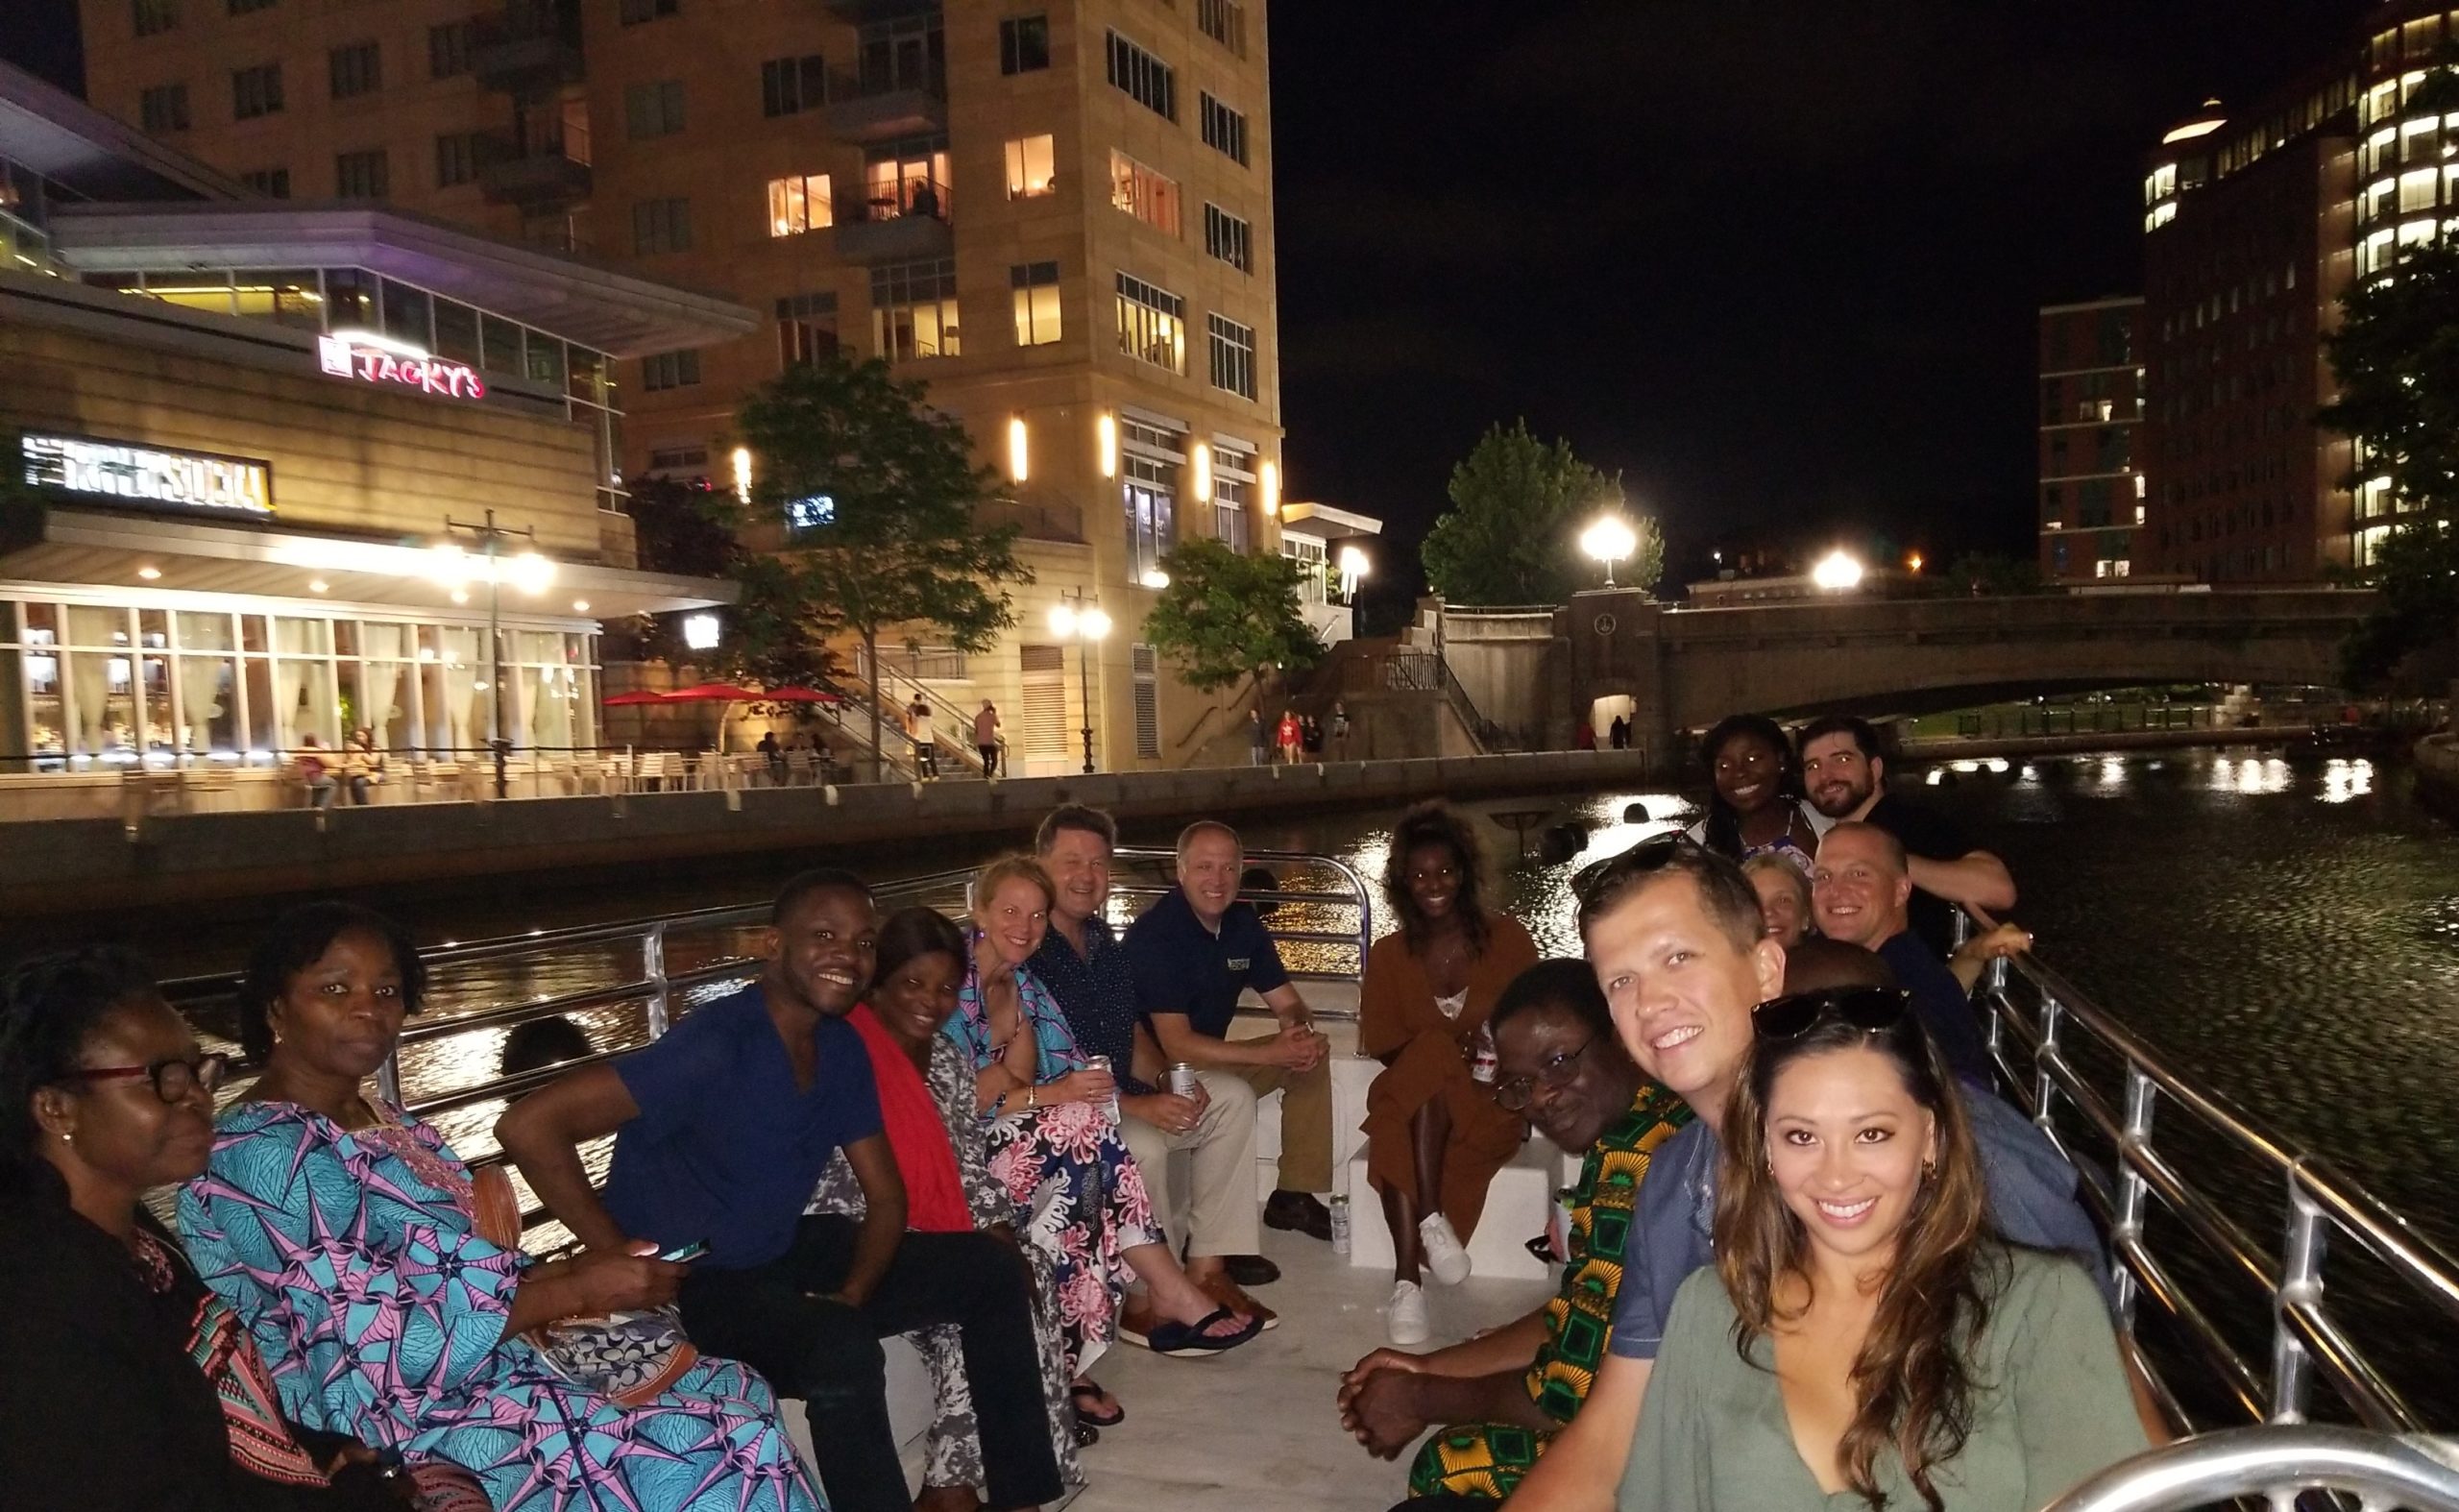 Tourists on a Boat Ride - an experience included in the Dinner and a Cruise Tour.